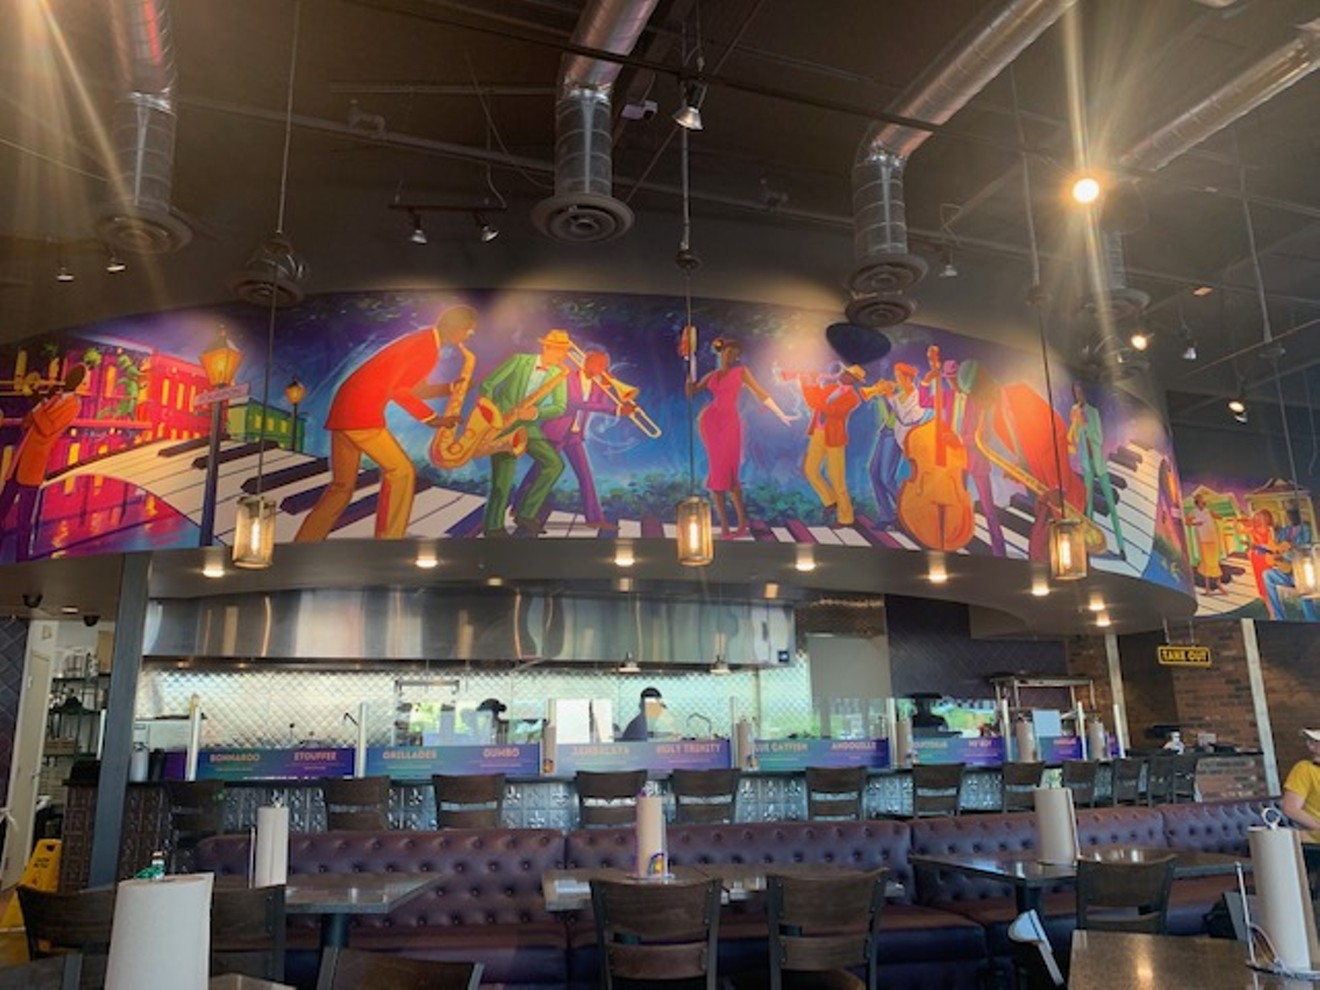 This jazz musician, Southern-themed mural has piano keys running throughout with a special appearance from some cartoon characters.